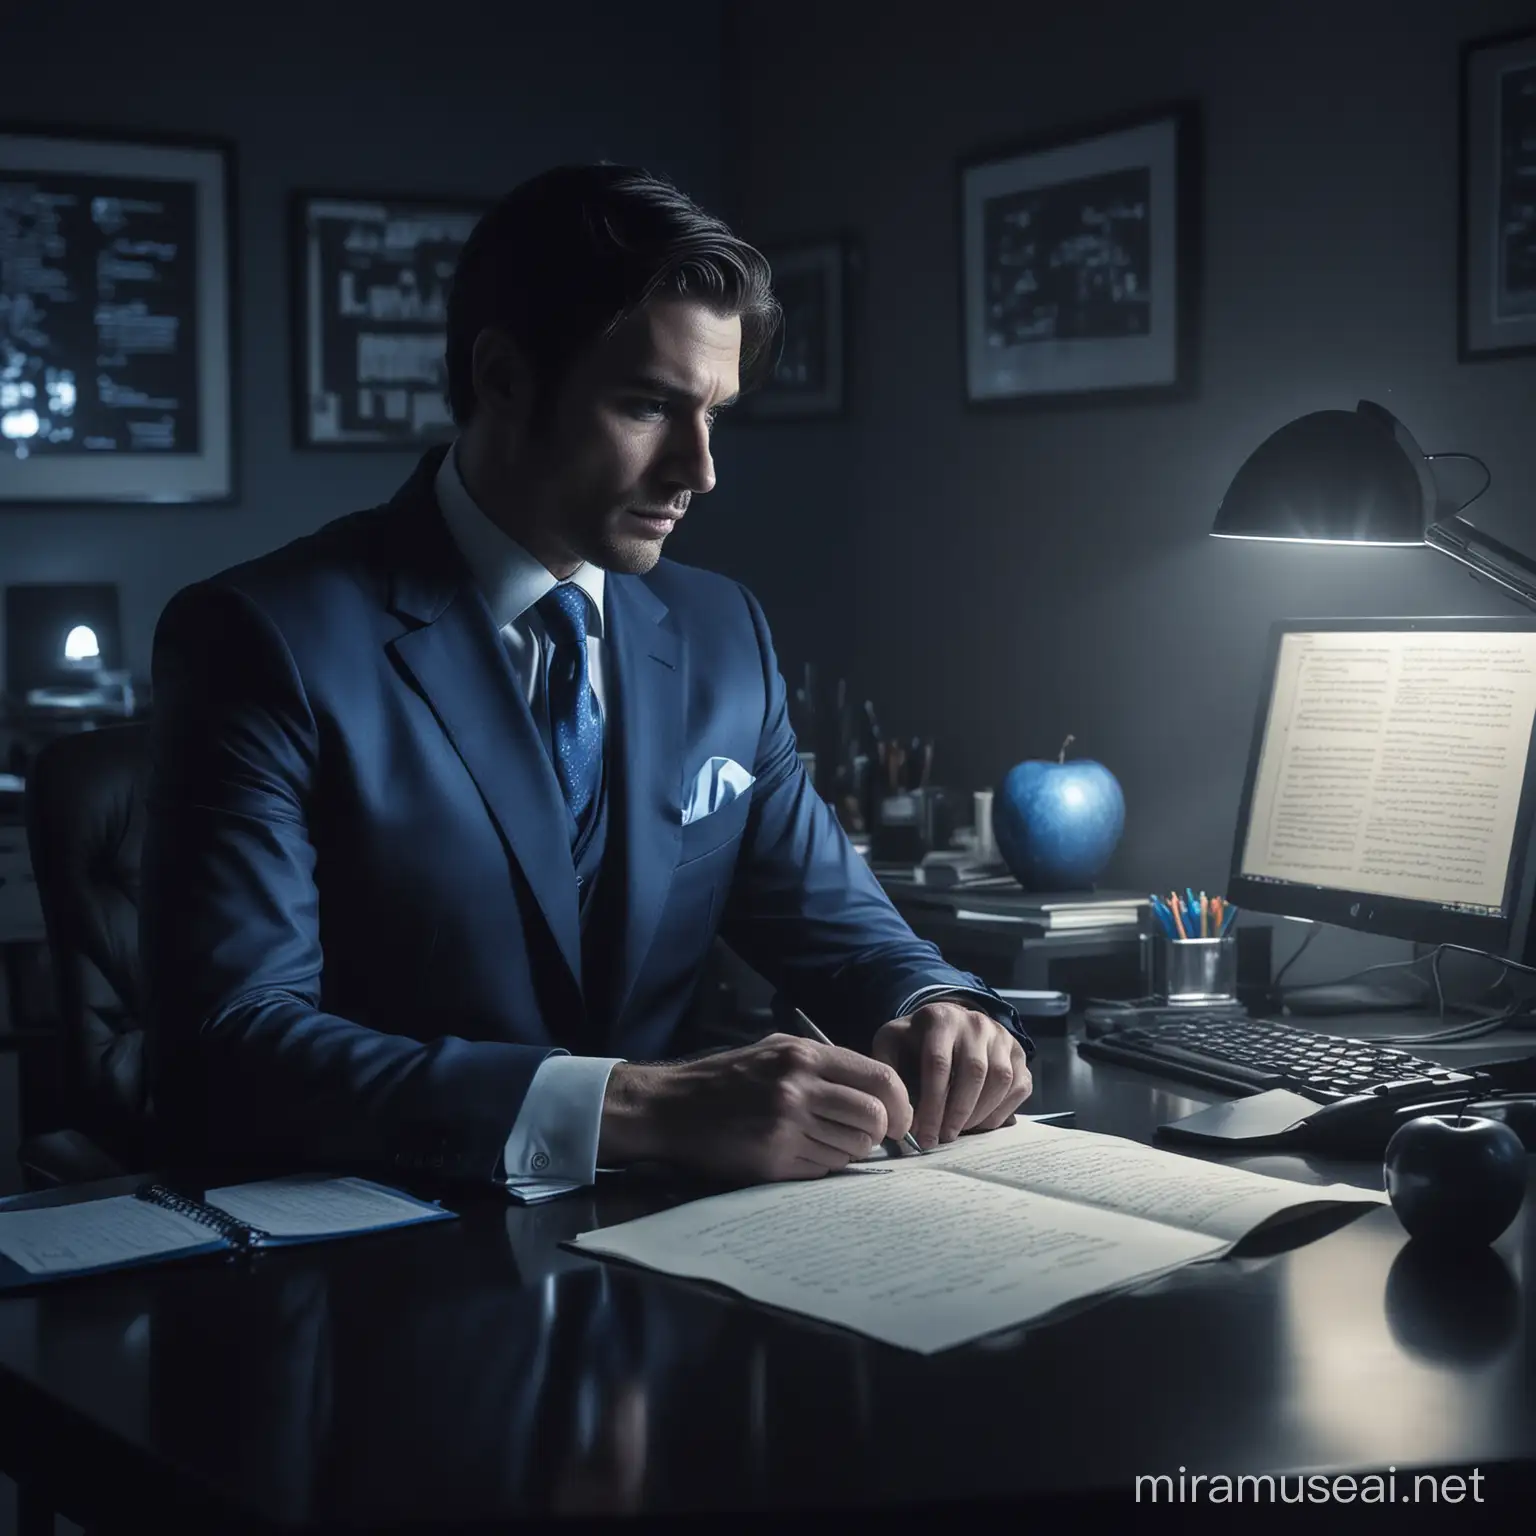 A bulked man dressed in a suit, sitting in his very dark office of luxury, the office only has blue shiny luxurious objects emitting a little amount of blue and silverish light, he holds a handwritten paper on his hand which he looks at with seriousness, there is an apple computer on his desk, the background is of midnight with only moonlight shining over the scene.